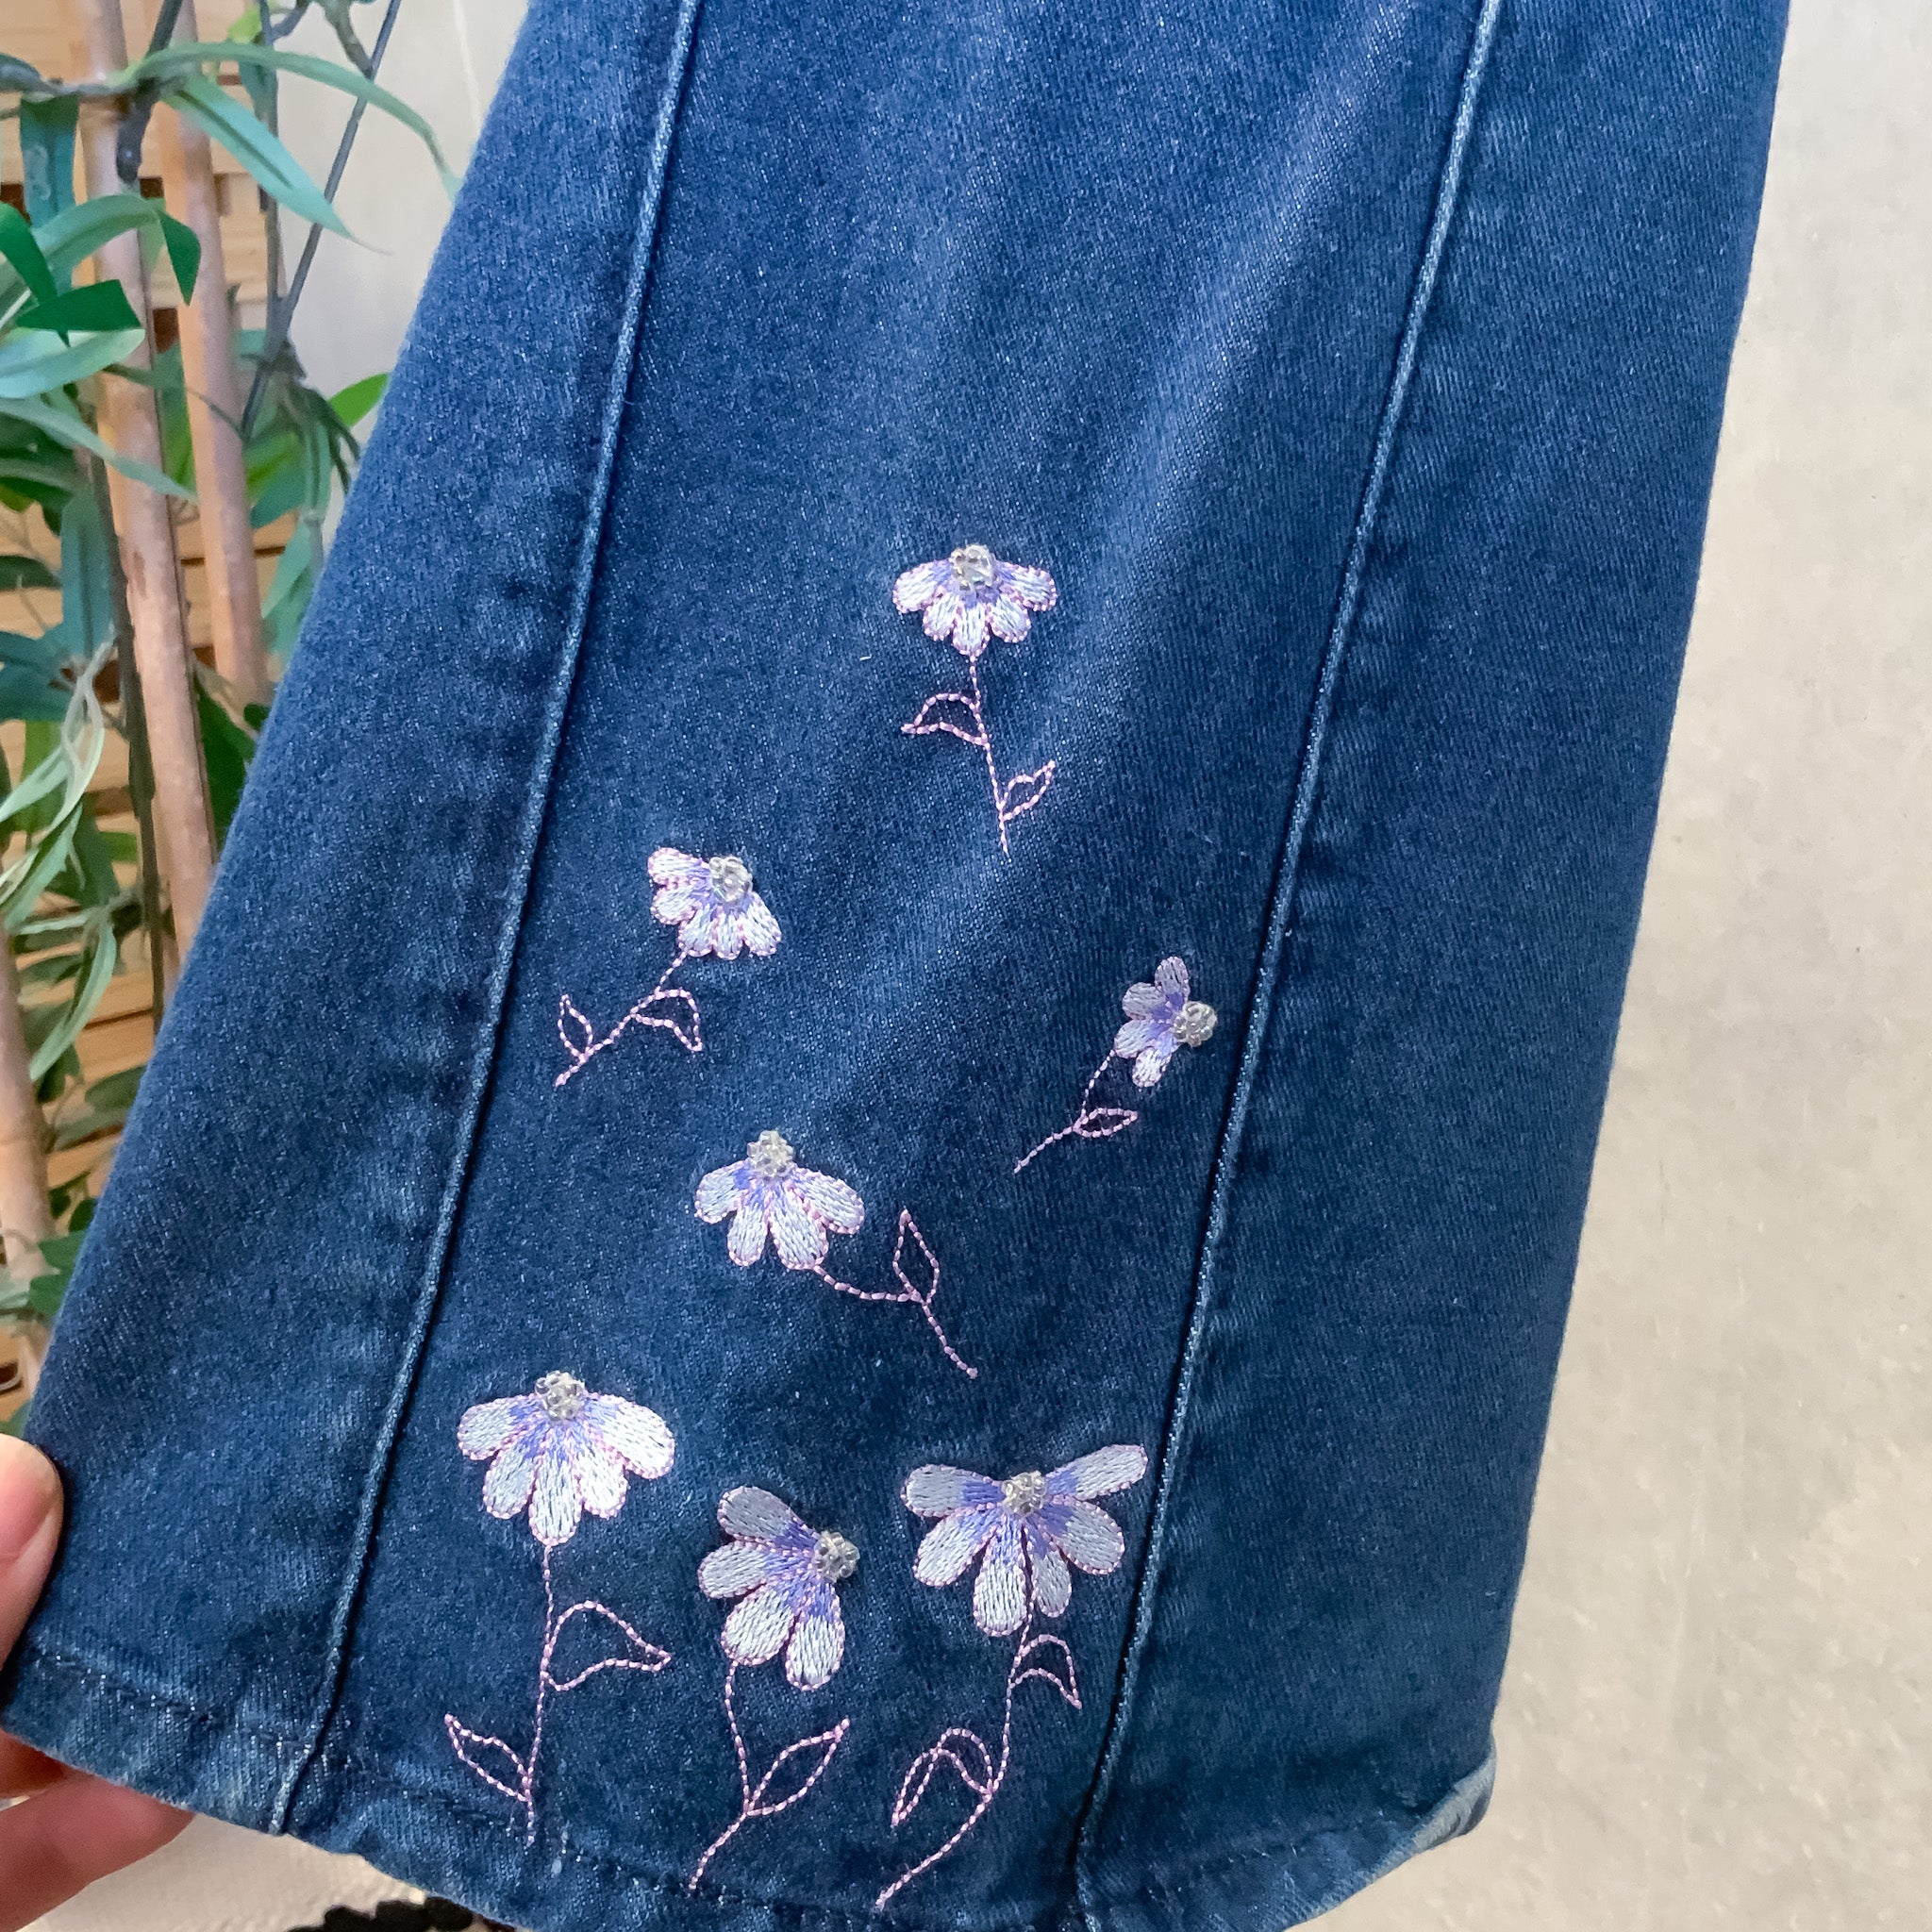 RARE RIDERS Floral Embroidered Flared Leg Jeans - Size 10